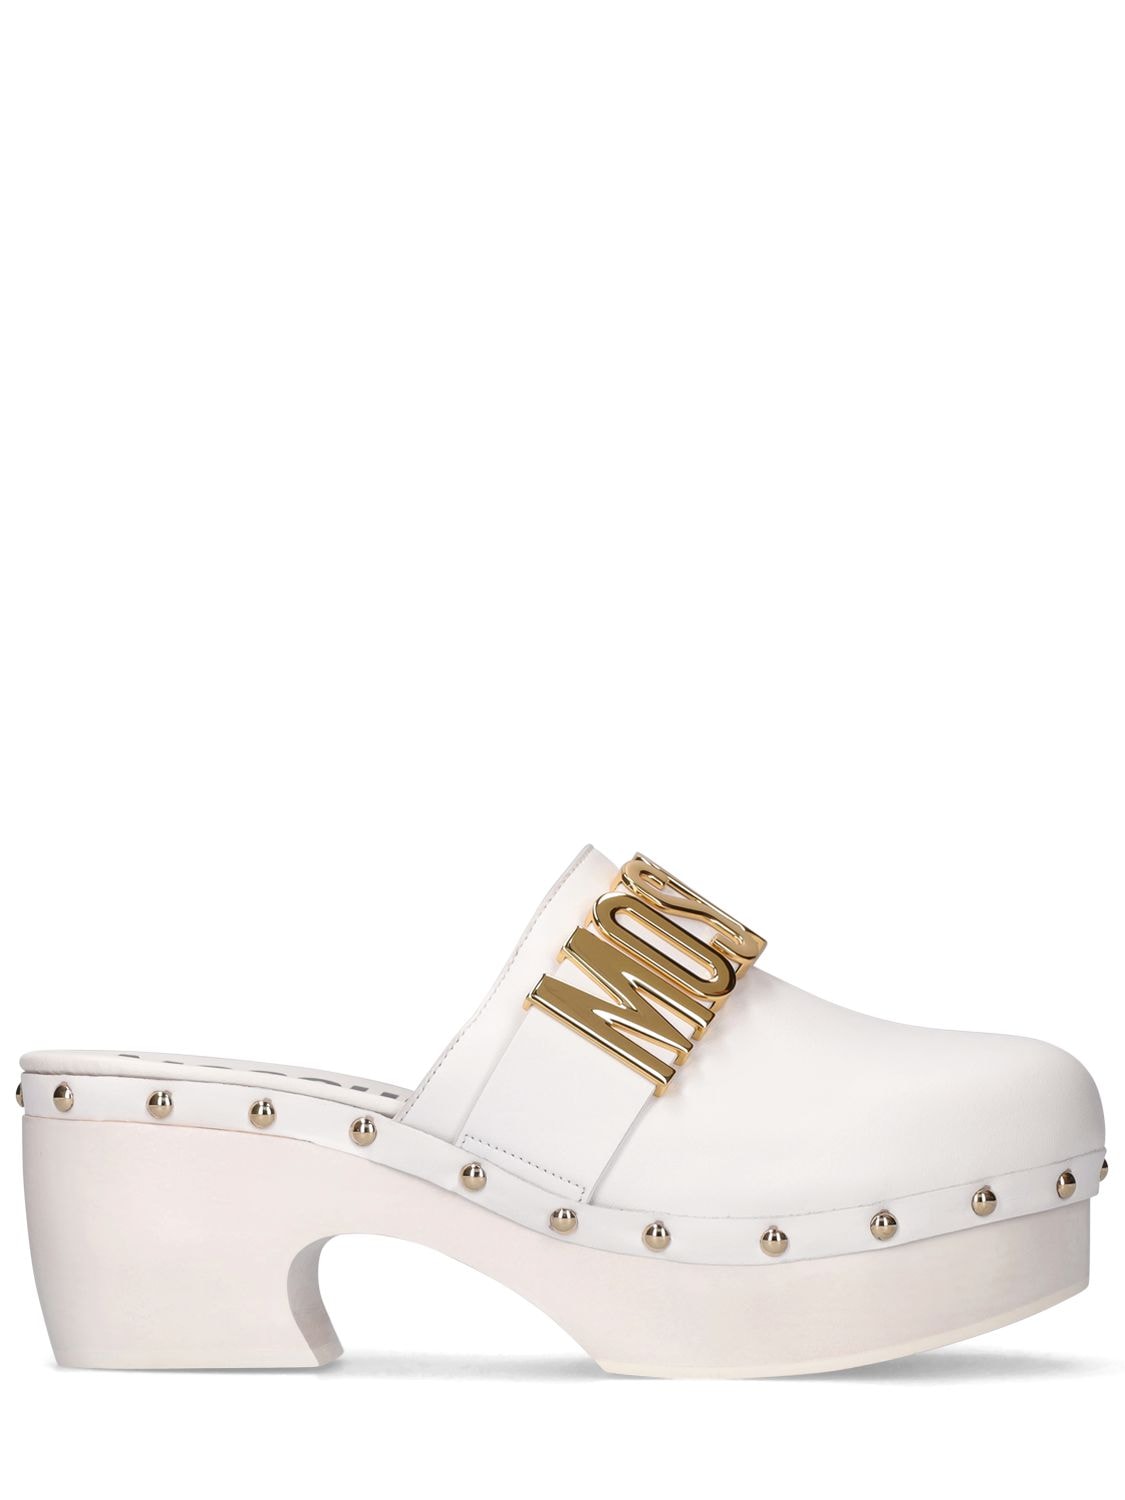 MOSCHINO 70mm Embellished Leather Clogs